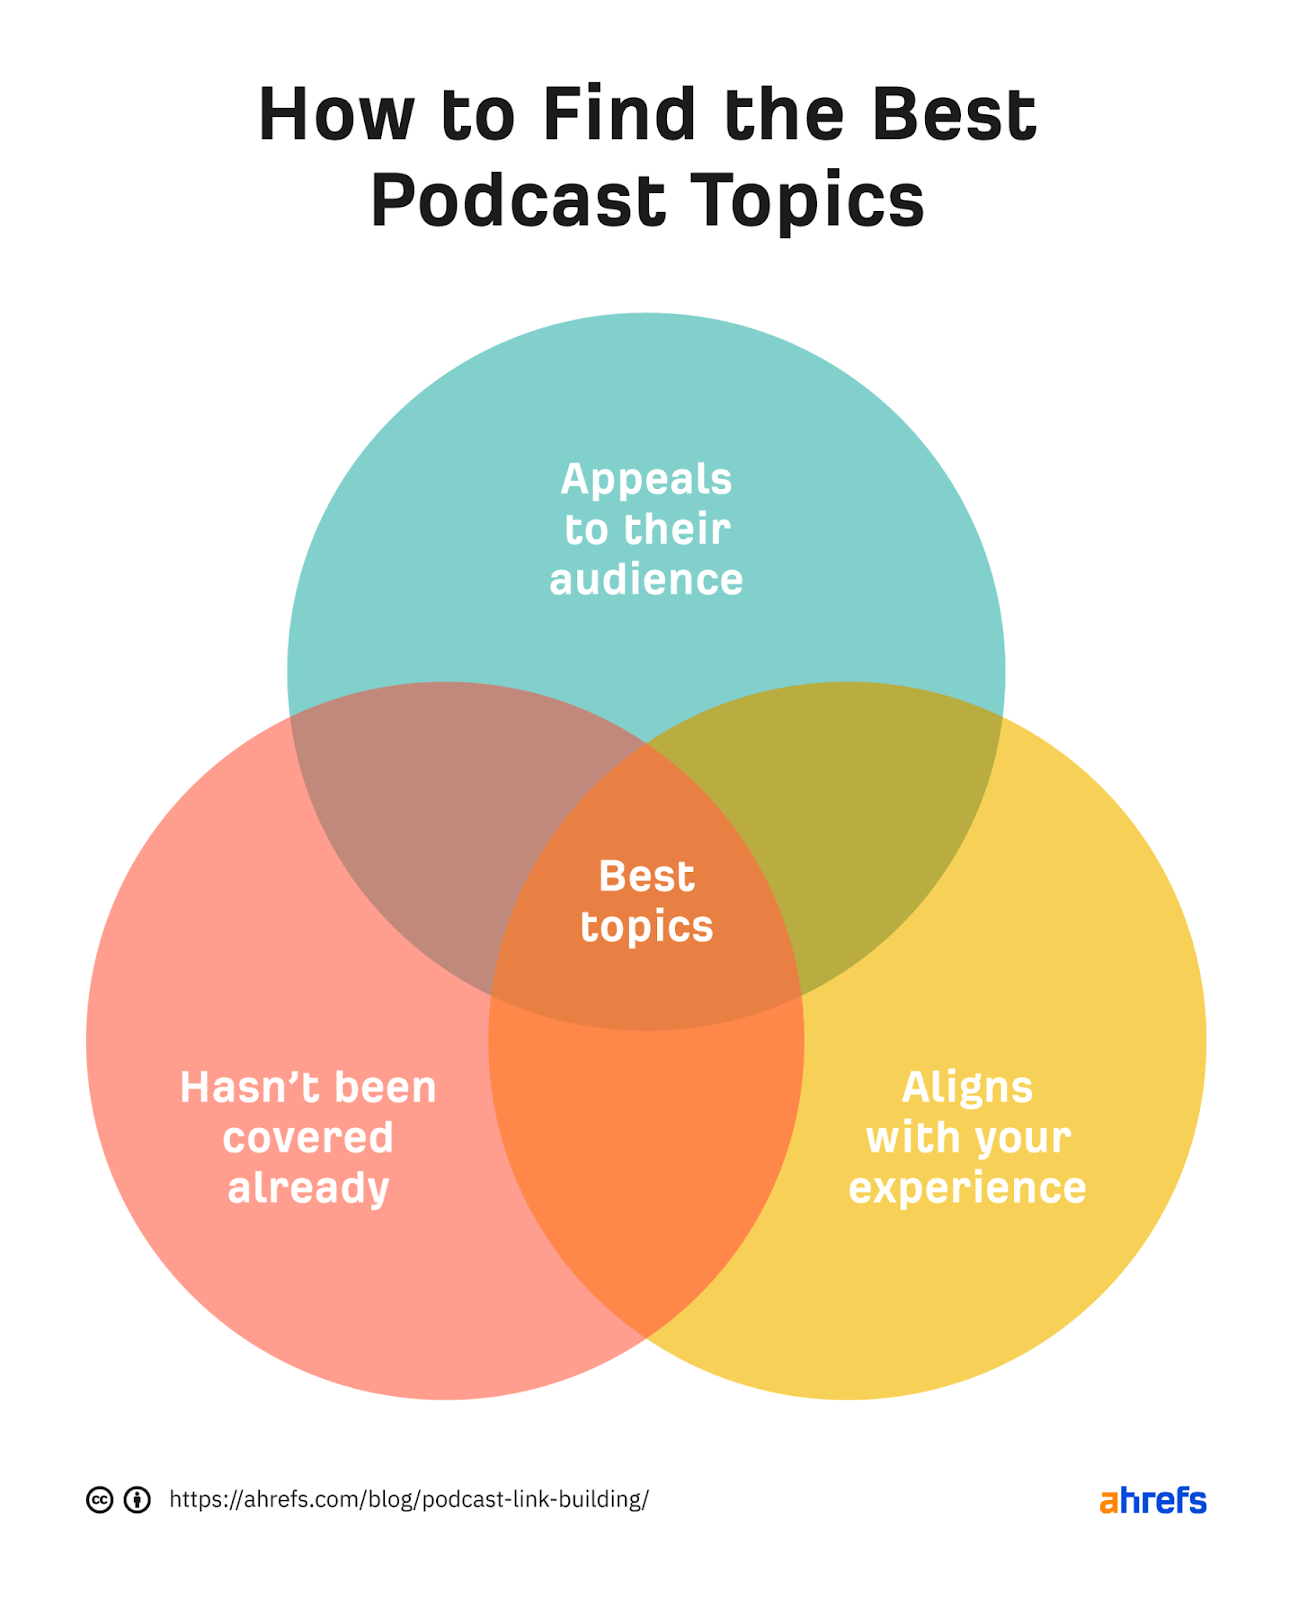 How-to-find-podcast-topics